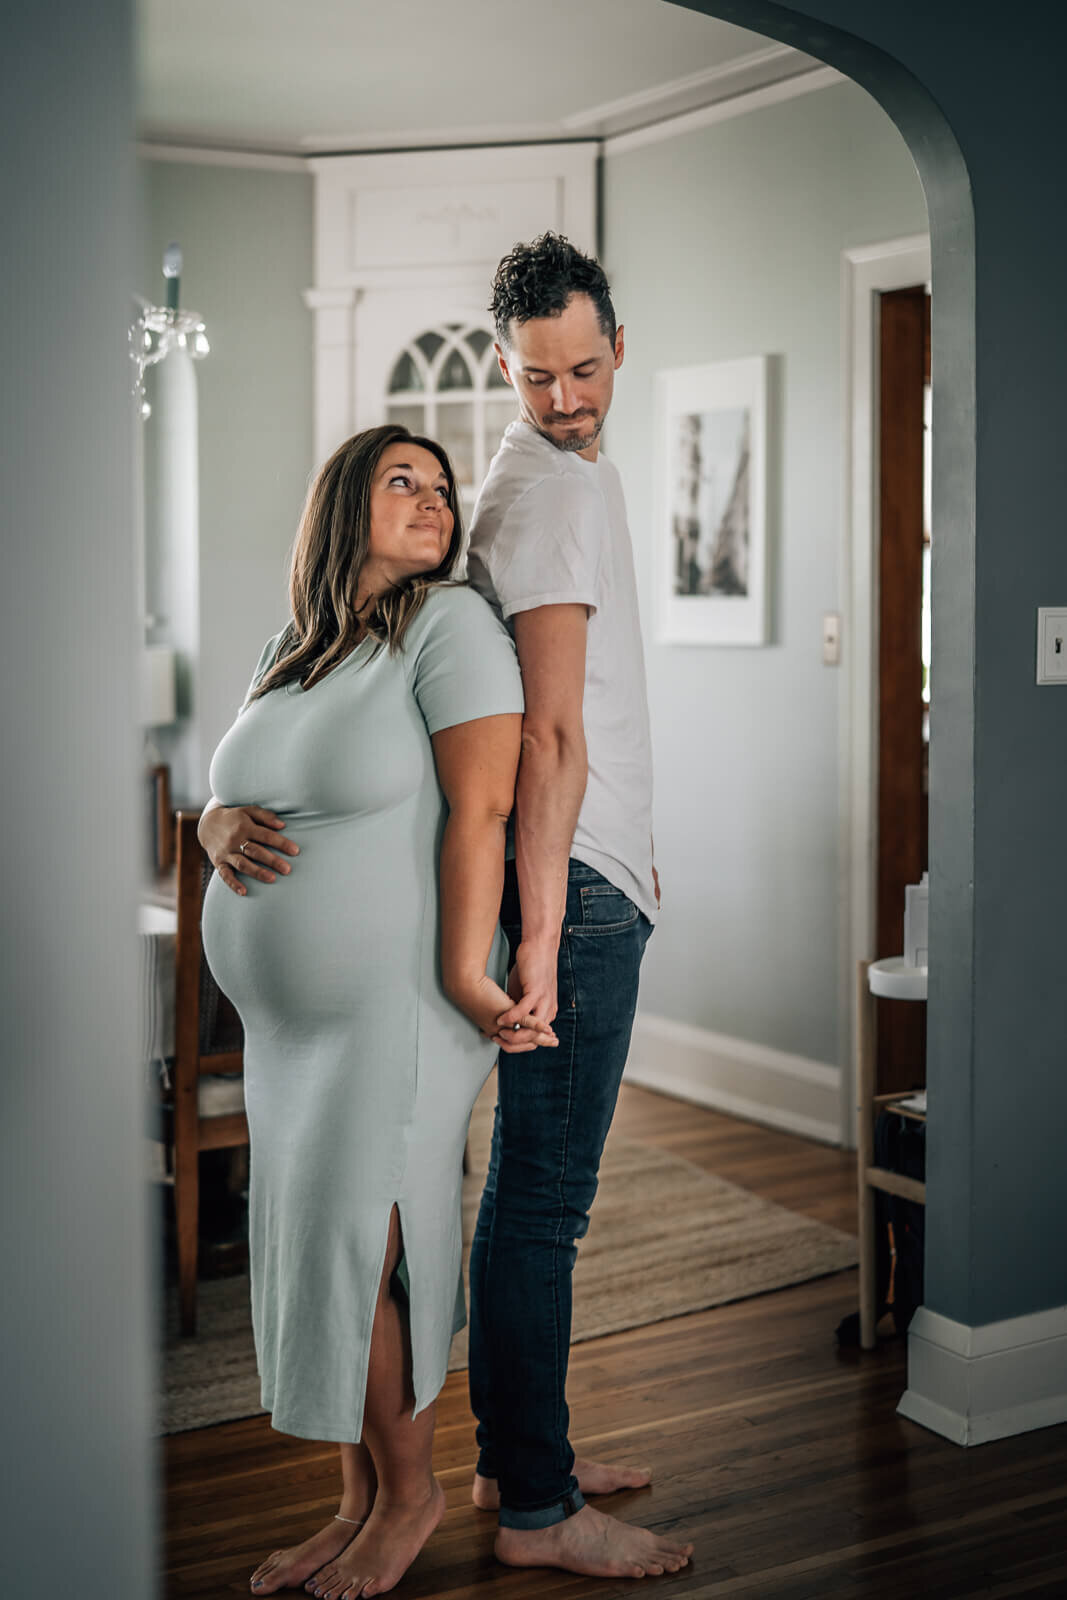 A pregnant mama stands back to back, holding hands and gazing up and back at her husband, frames by a beautiful architectural arch in their home.